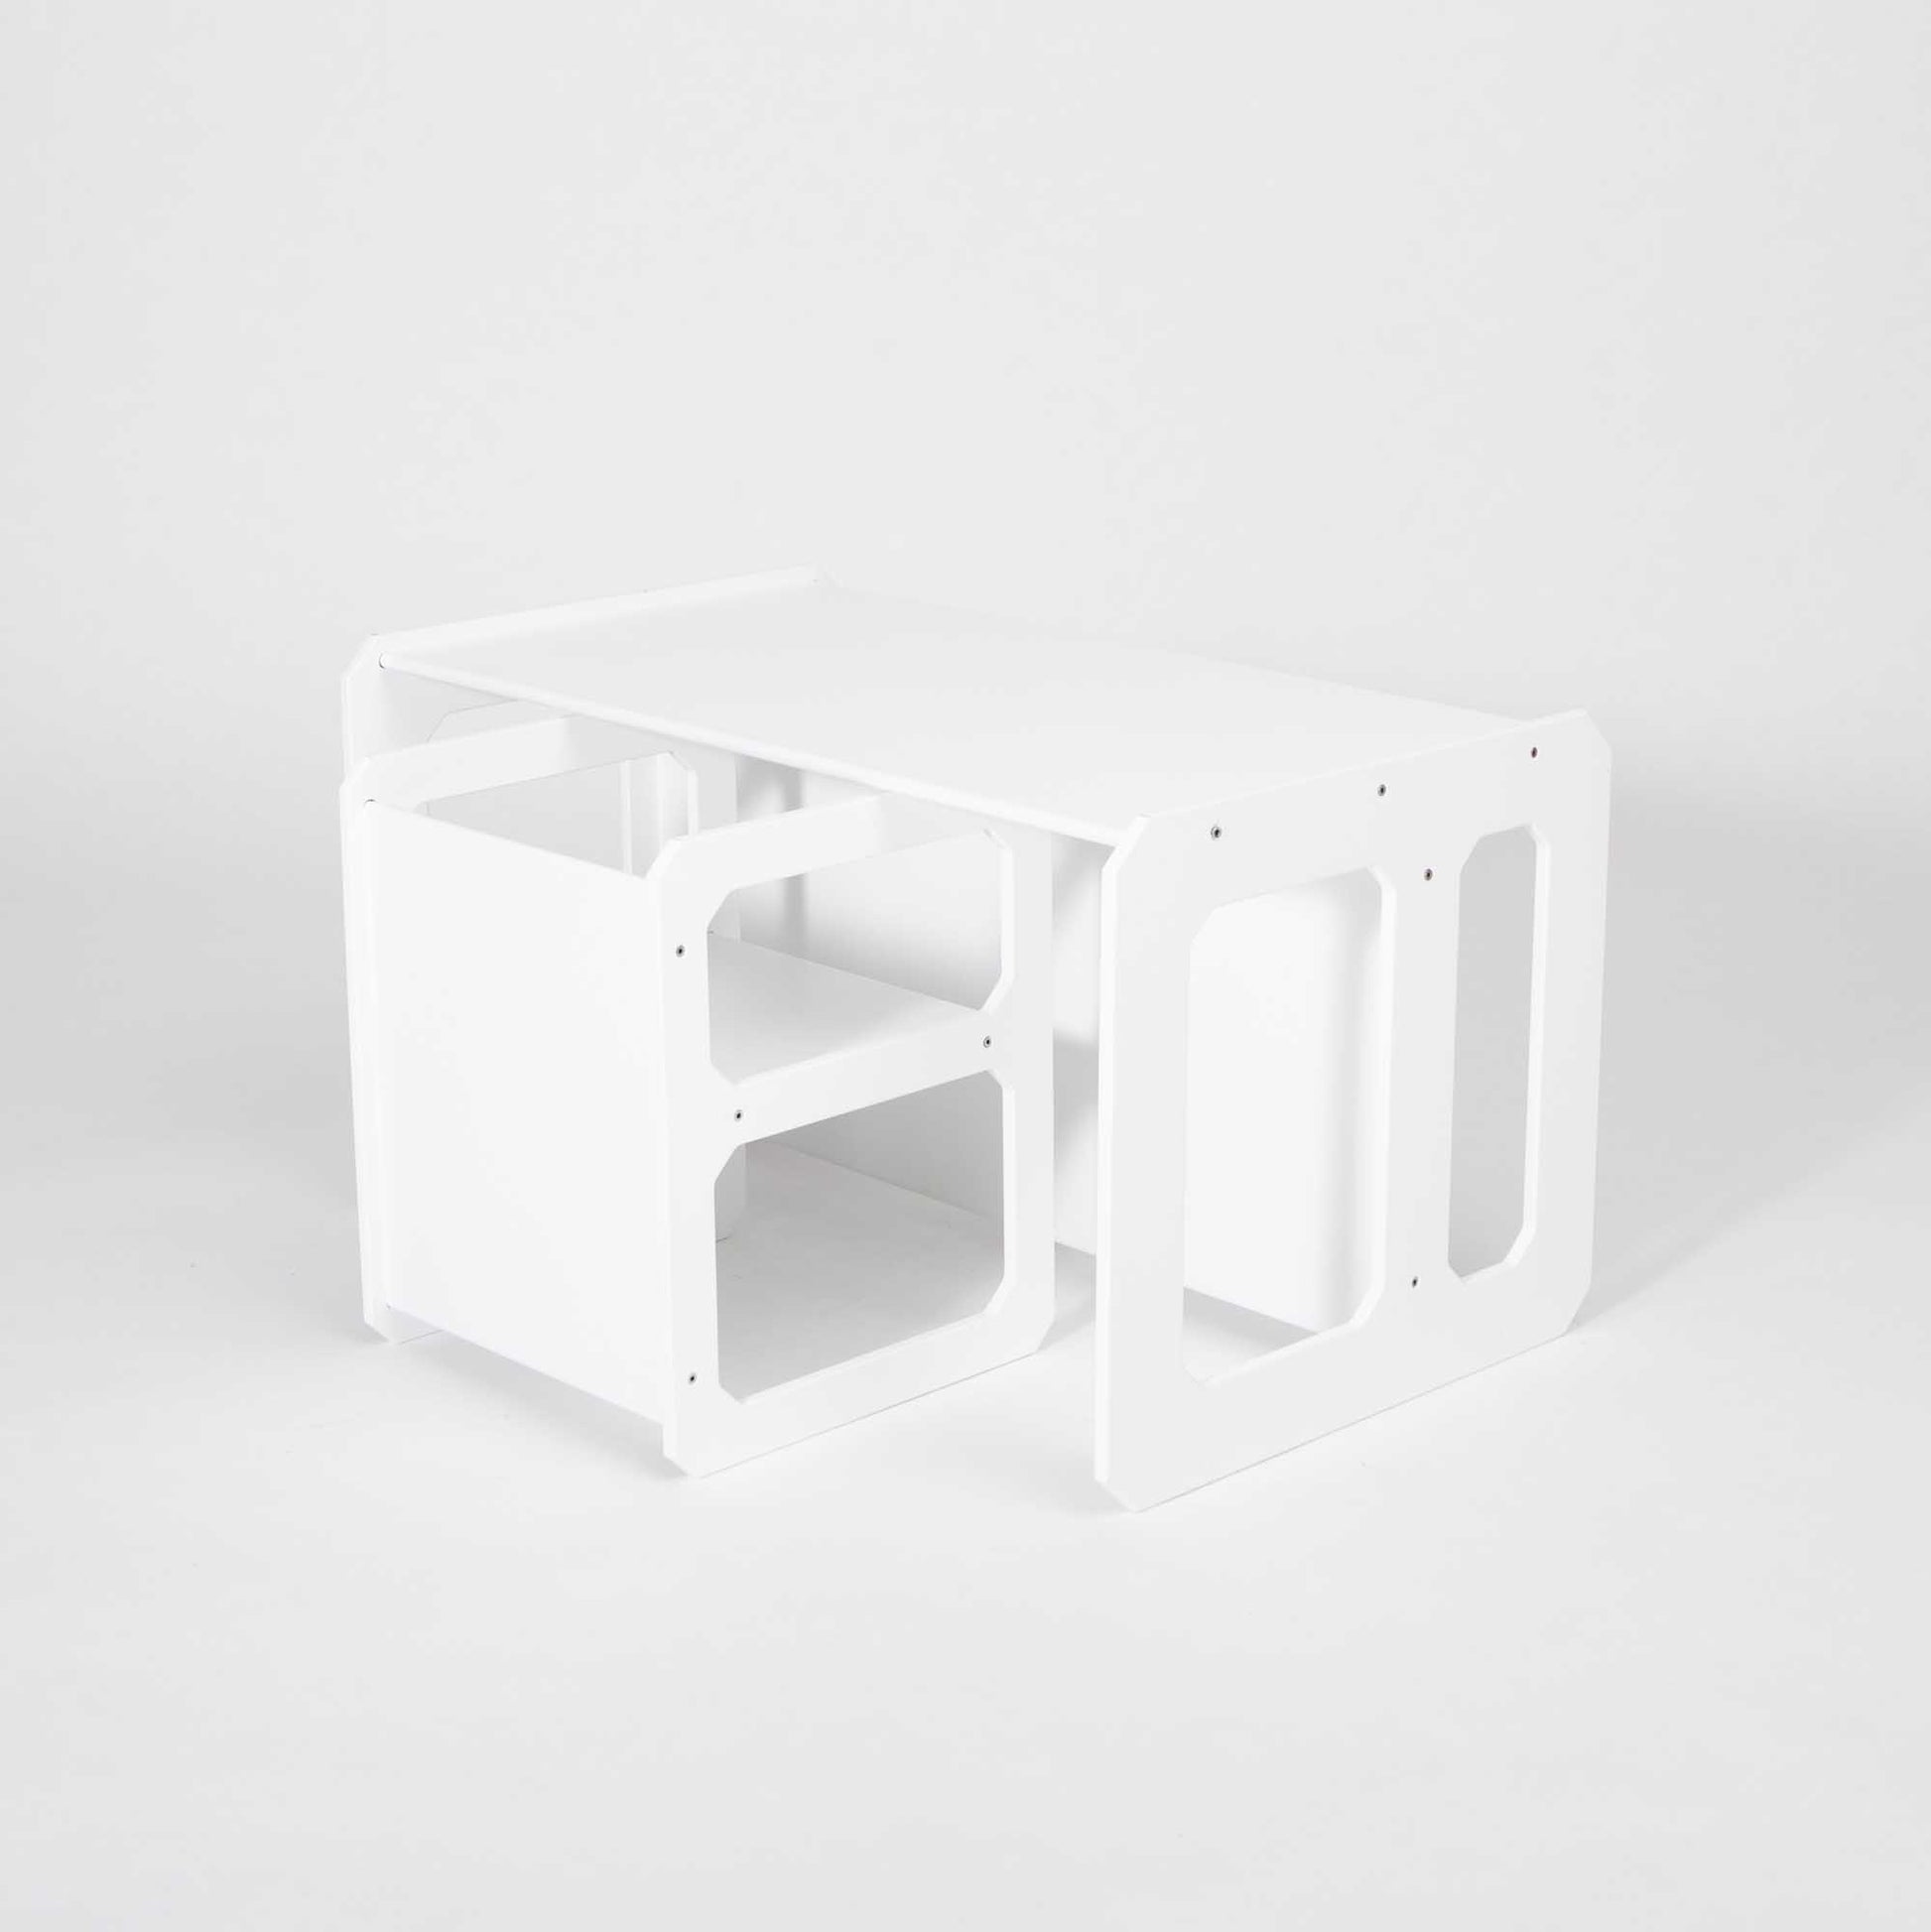 The description of a white table can be modified with the keywords "toddler table and chair set" or "Montessori weaning table and chair set by Sweet Home From Wood".